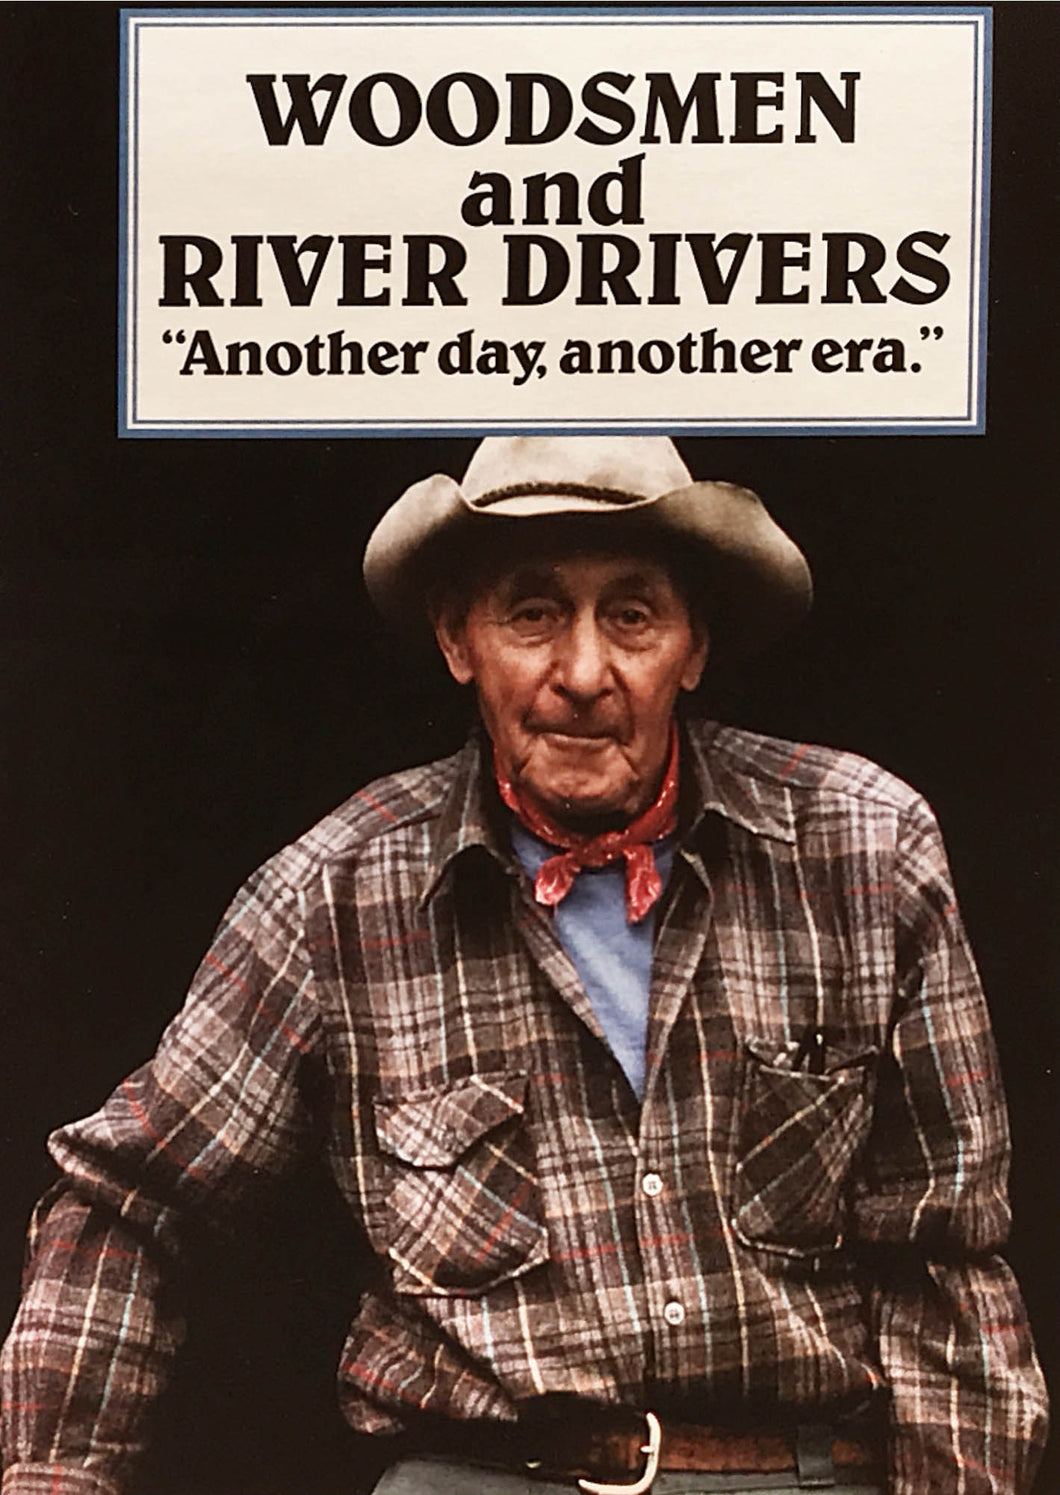 Woodsmen and River Drivers, 